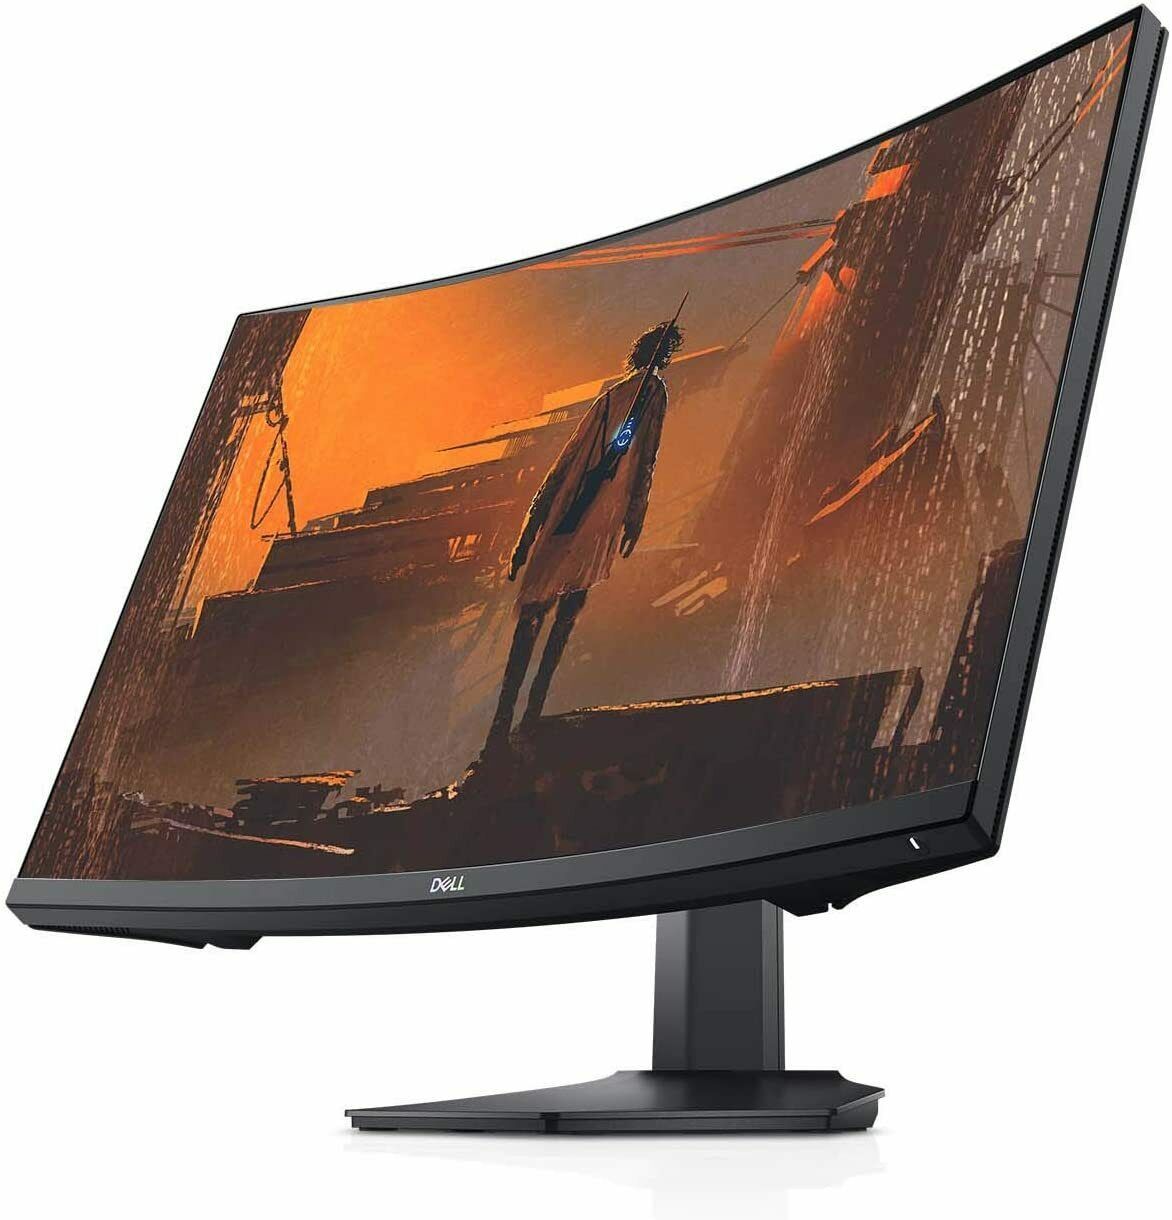 Dell - S2721HGF 27" Gaming - LED Curved FHD FreeSync and G-SYNC Compatible montior, new checked (DISPLAYPORT, HDMI) new